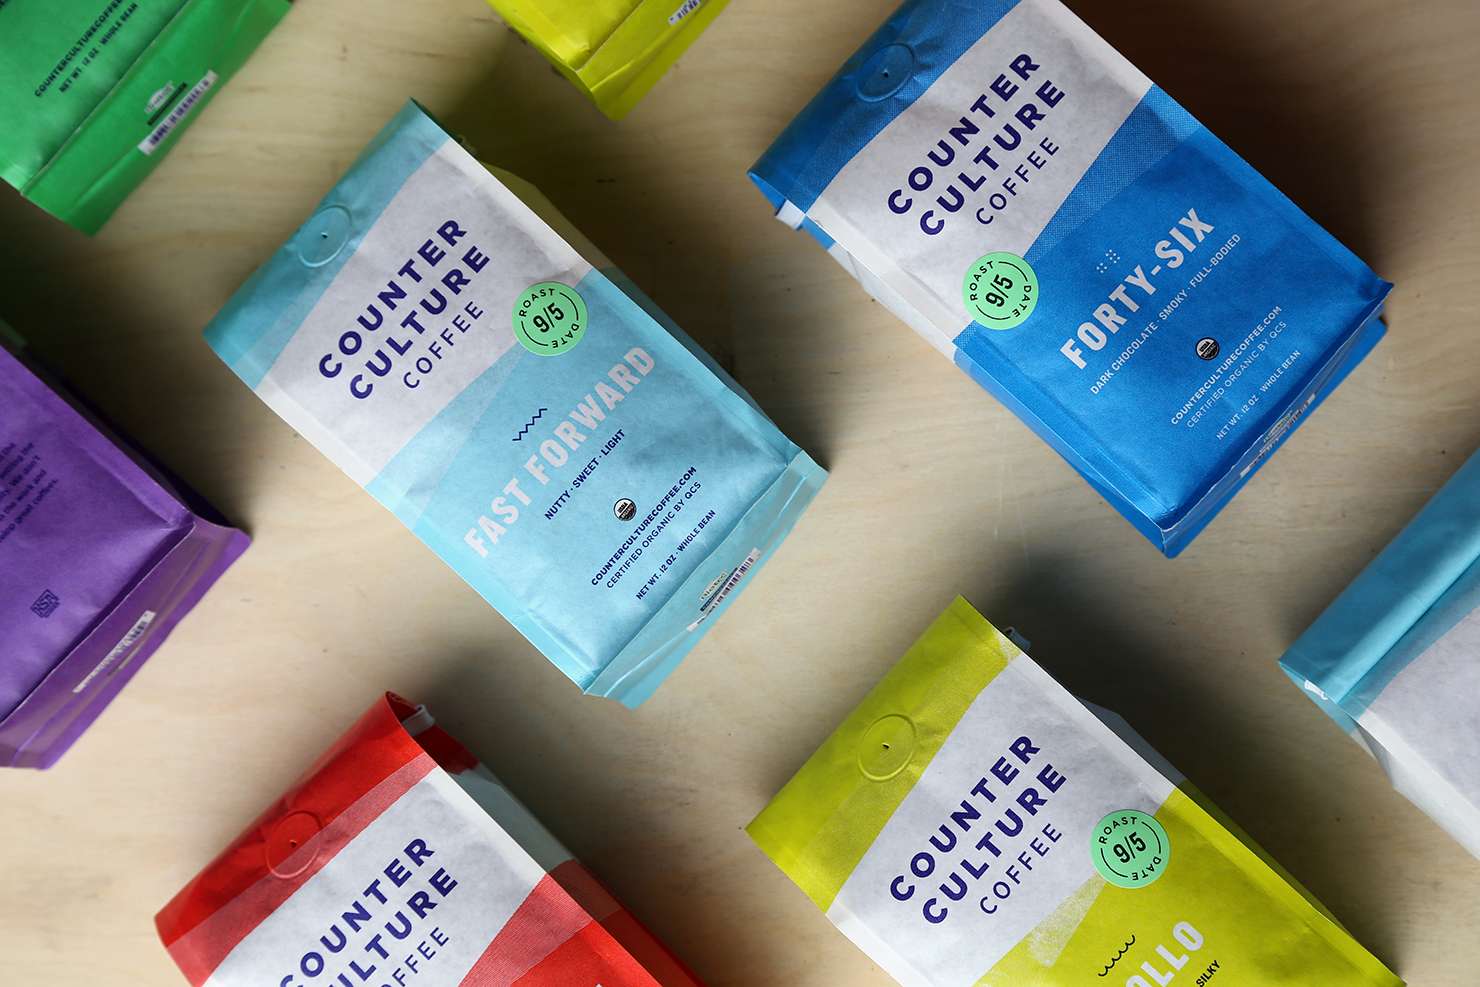 First Look: Counter Culture Coffee Refreshes Lineup With New Design, Names